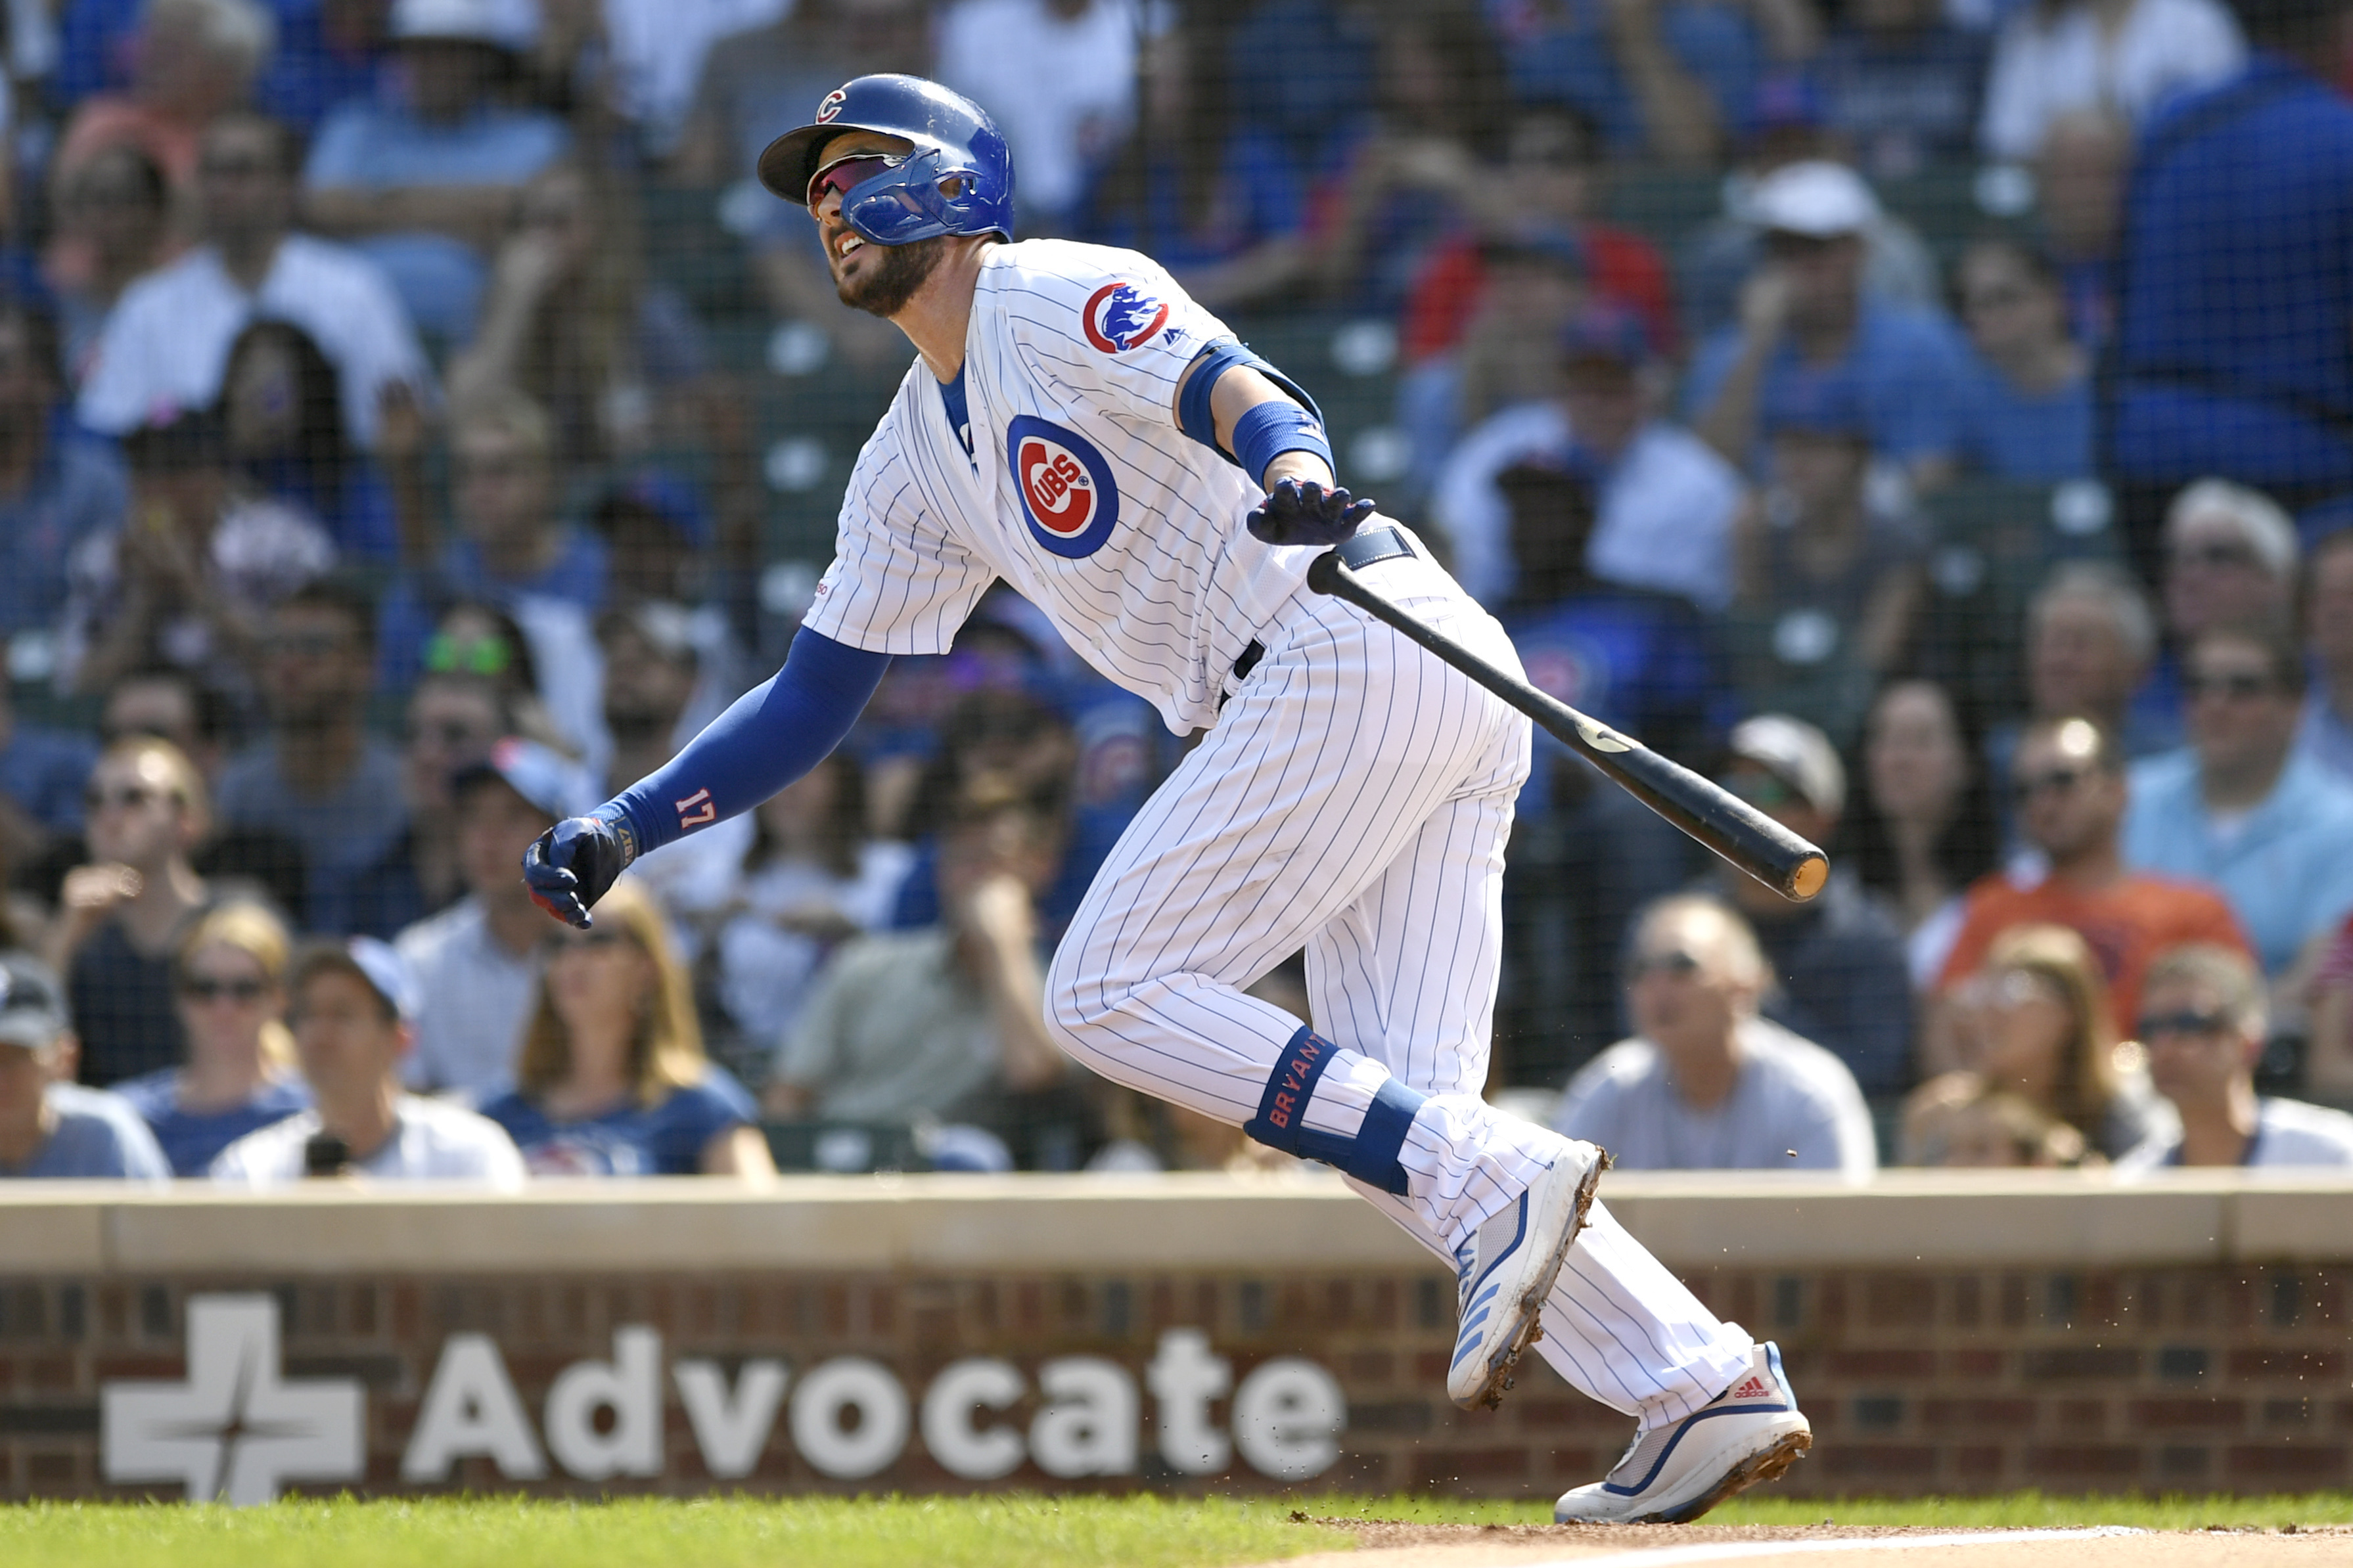 Chicago Cubs trade Kris Bryant to San Francisco Giants